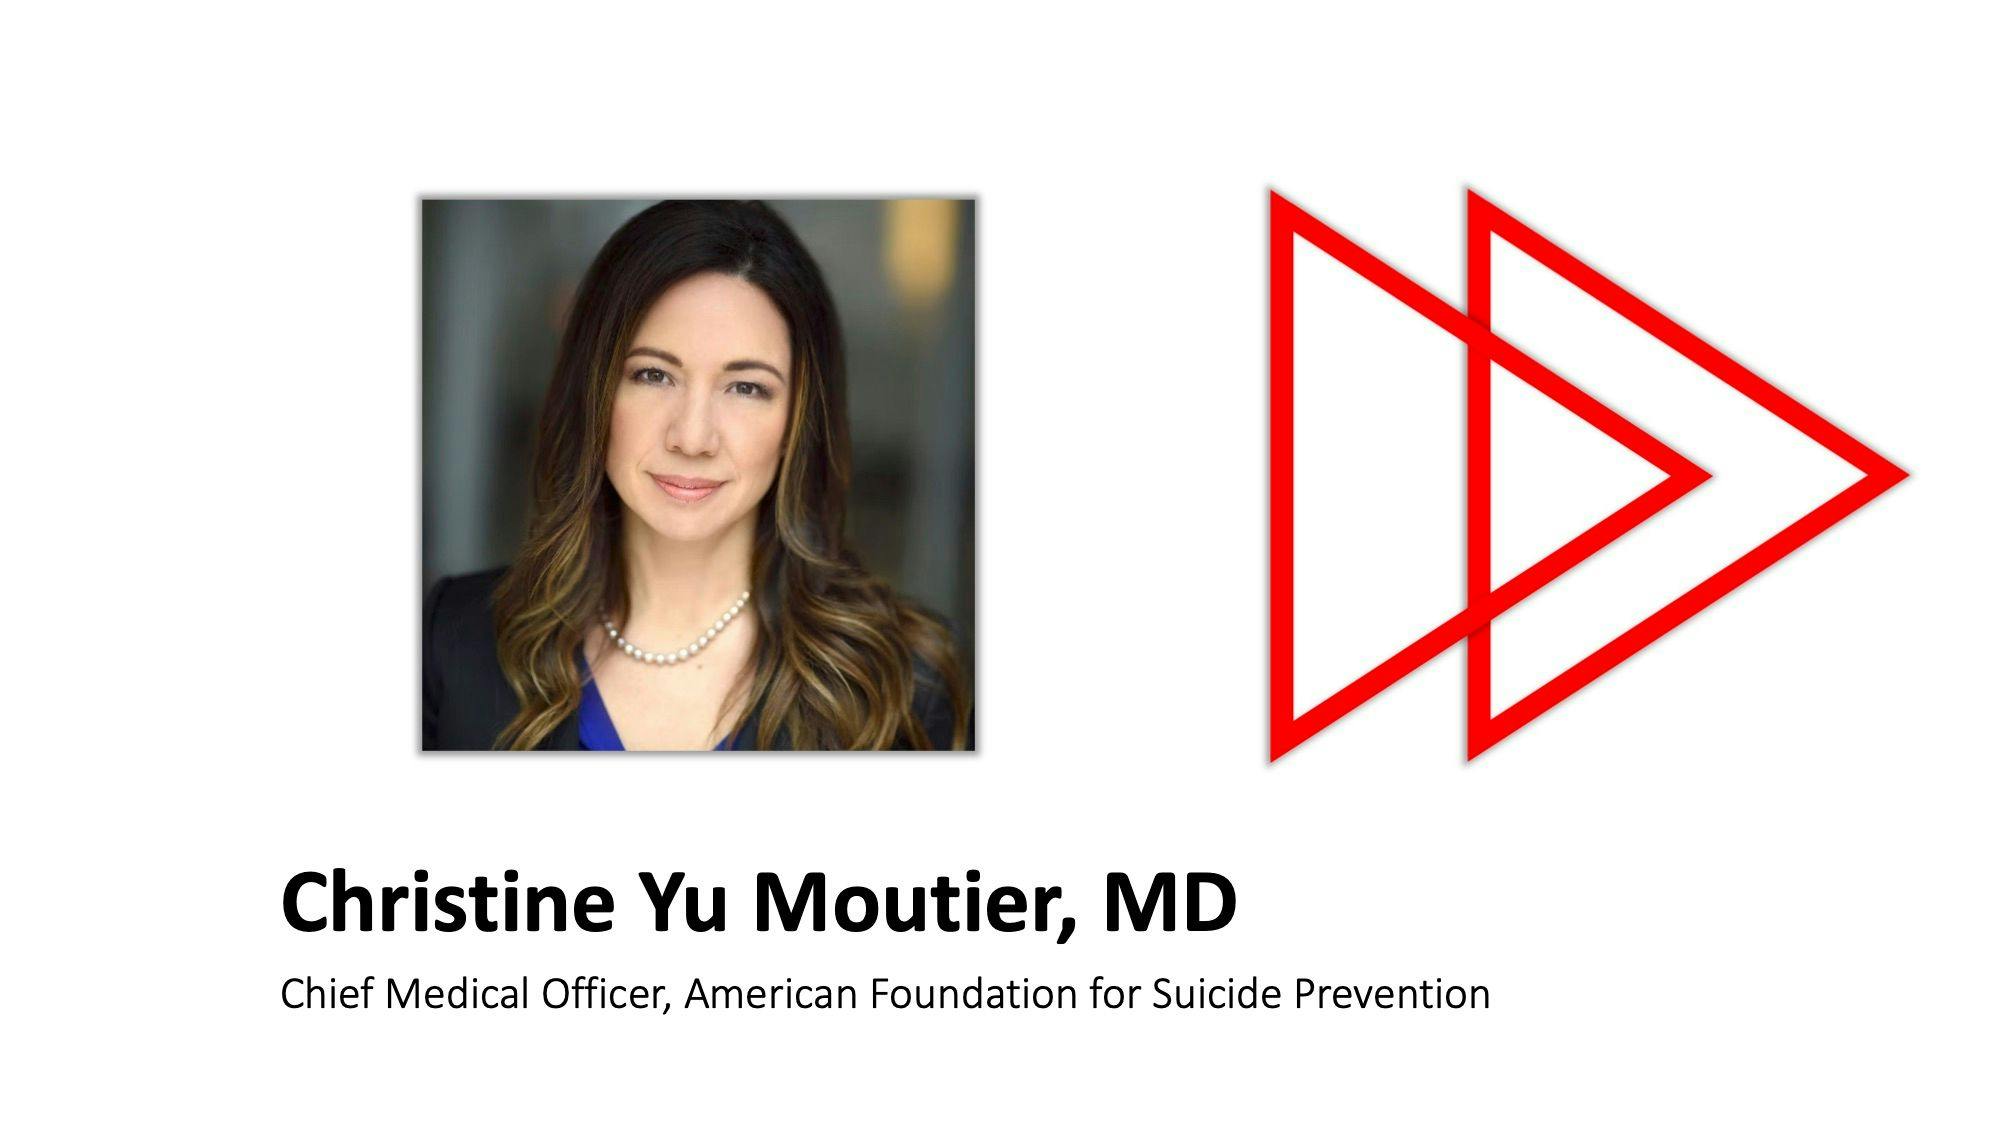 Christine Yu Moutier, MD, gives expert advice